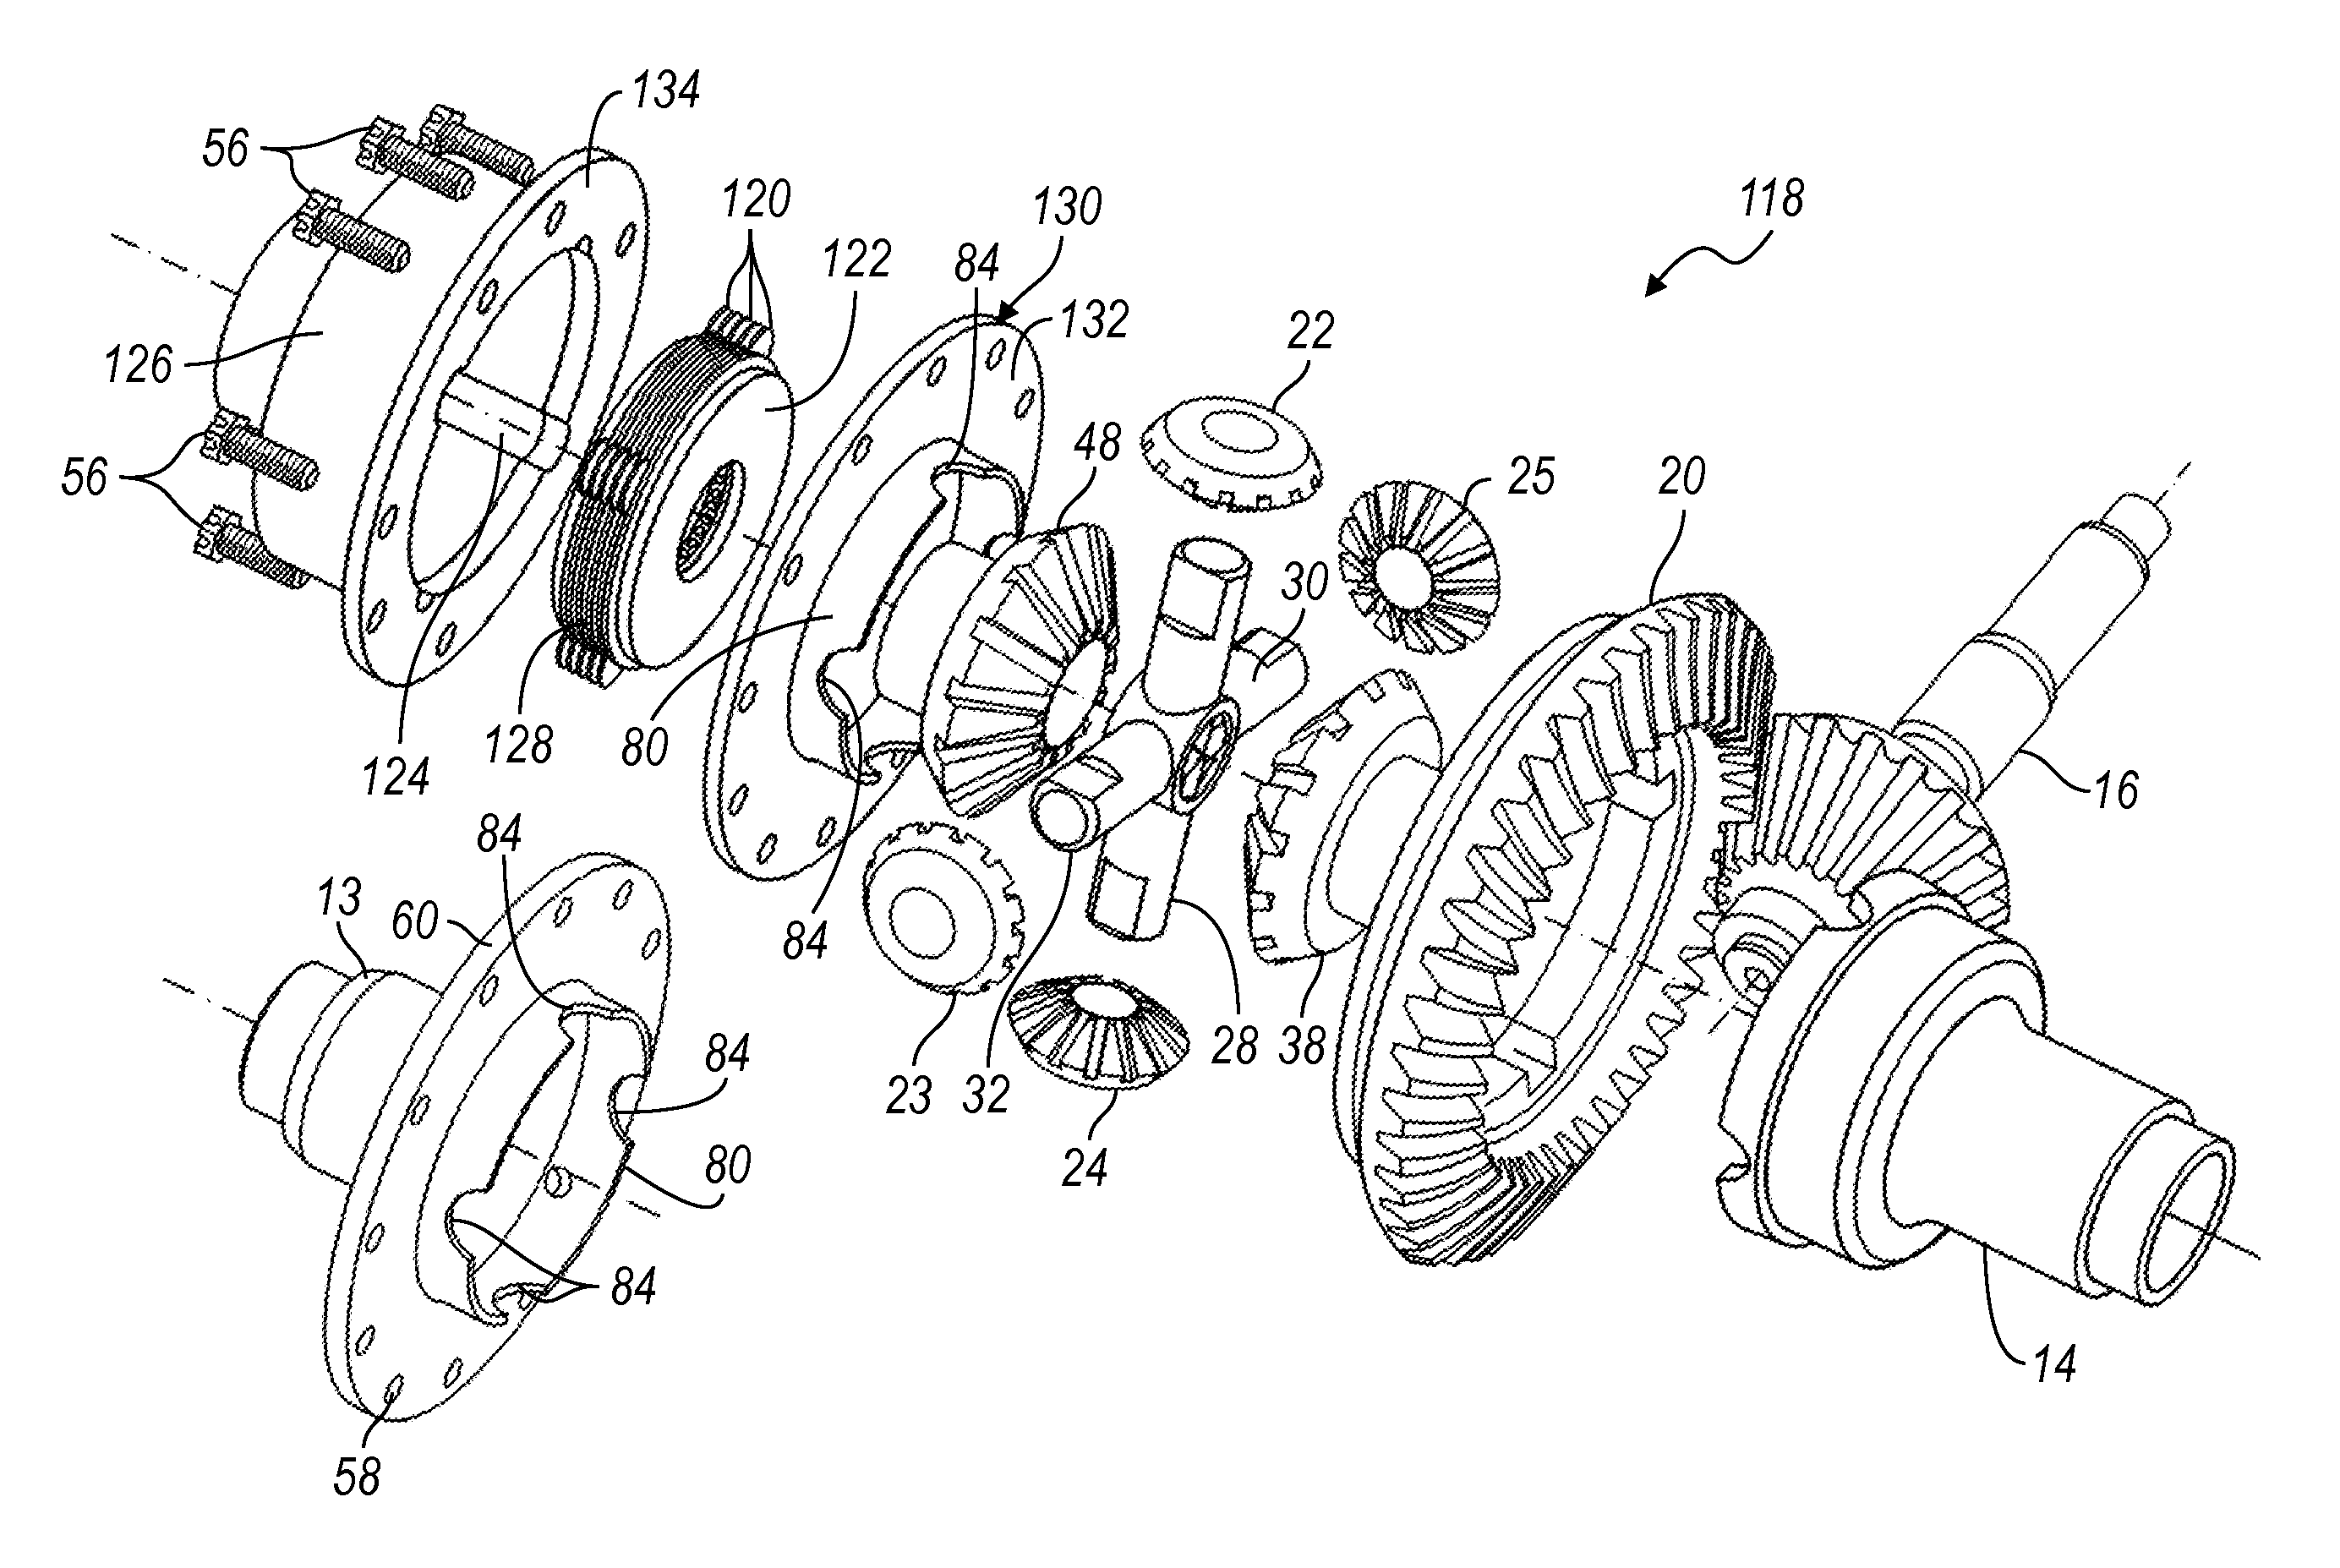 Differential mechanism having multiple case portions